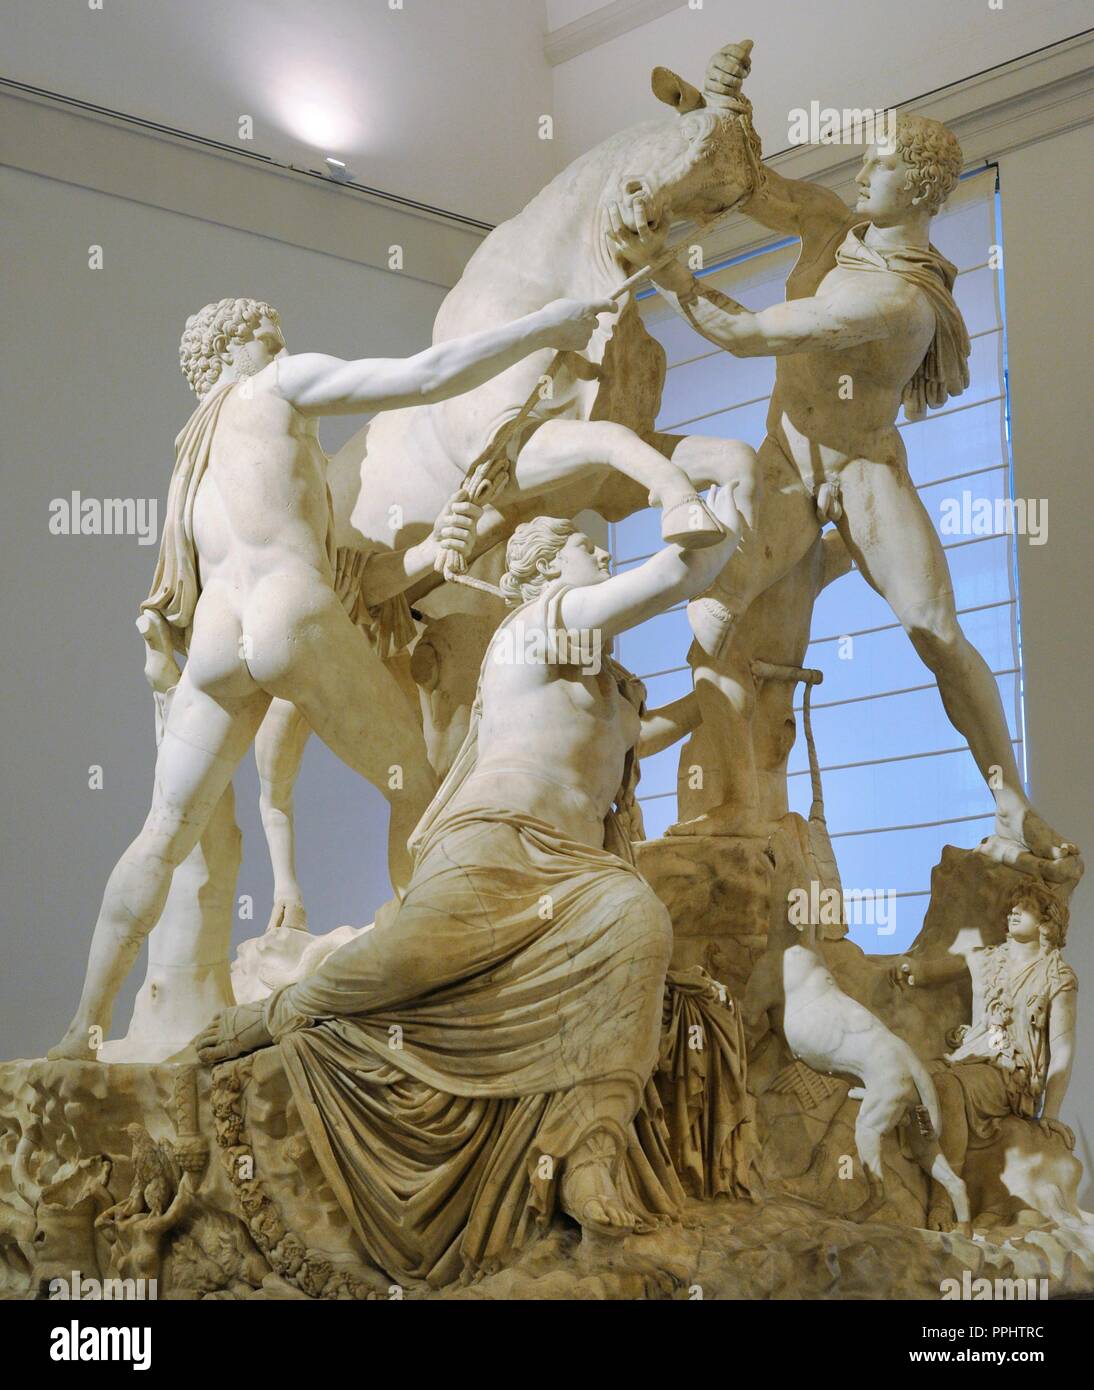 The Farnese Bull. Roman copy (3rd century AD) of a Hellenistic sculpture. Myth of Dirce. She was tied to a wild bull by the sons of Antiope, Amphion and Zethus. From baths of Caracalla, Rome. National Archaeological Museum, Naples. Italy. Stock Photo